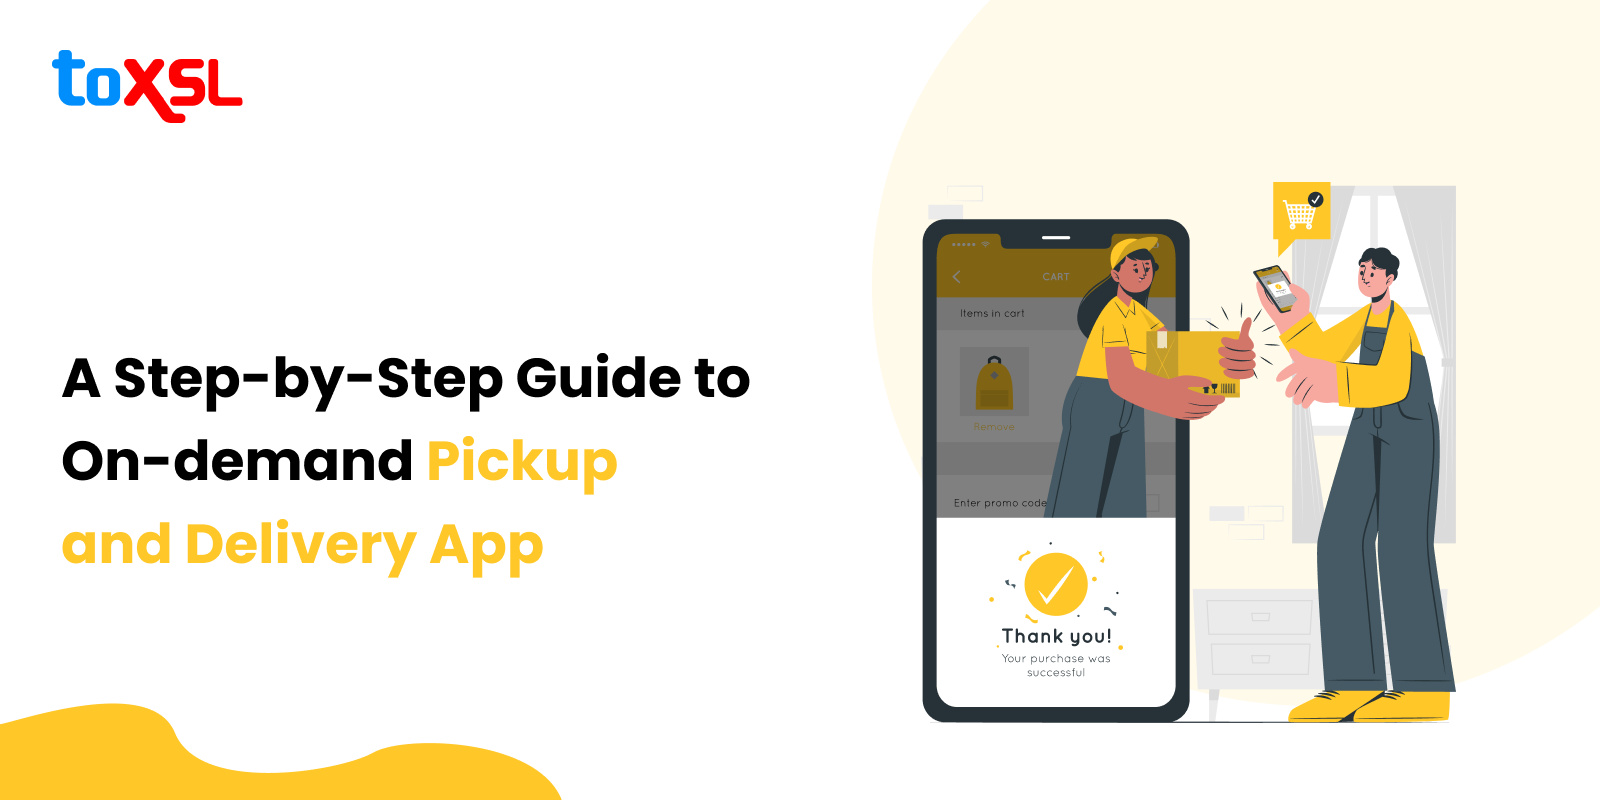 A Step-by-Step Guide to On-demand Pickup and Delivery App